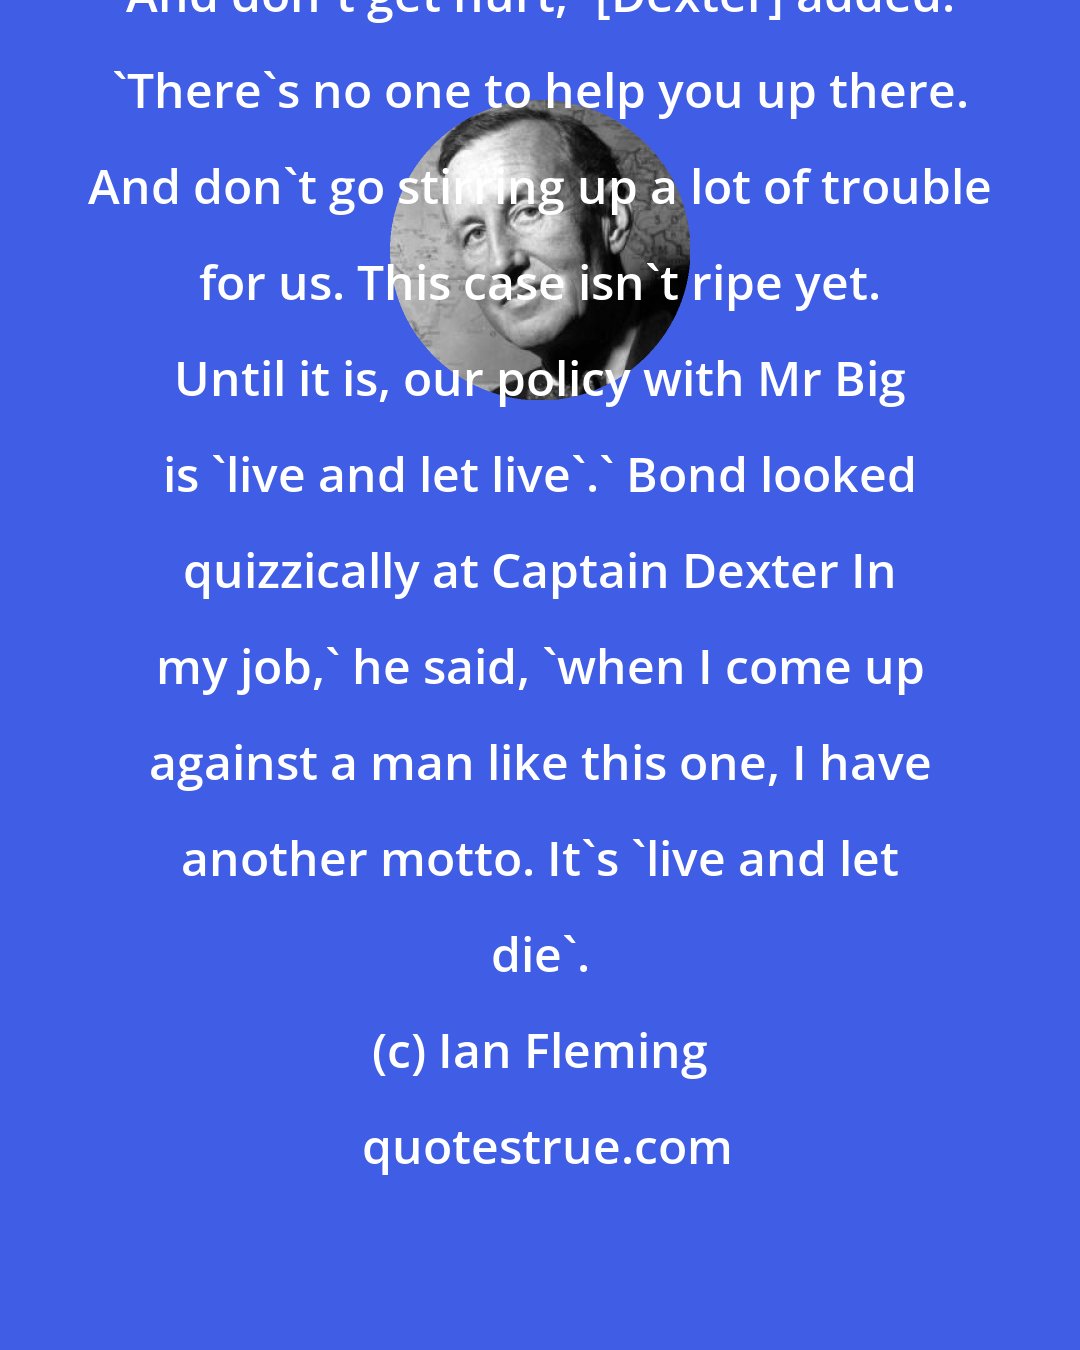 Ian Fleming: And don't get hurt,' [Dexter] added. 'There's no one to help you up there. And don't go stirring up a lot of trouble for us. This case isn't ripe yet. Until it is, our policy with Mr Big is 'live and let live'.' Bond looked quizzically at Captain Dexter In my job,' he said, 'when I come up against a man like this one, I have another motto. It's 'live and let die'.